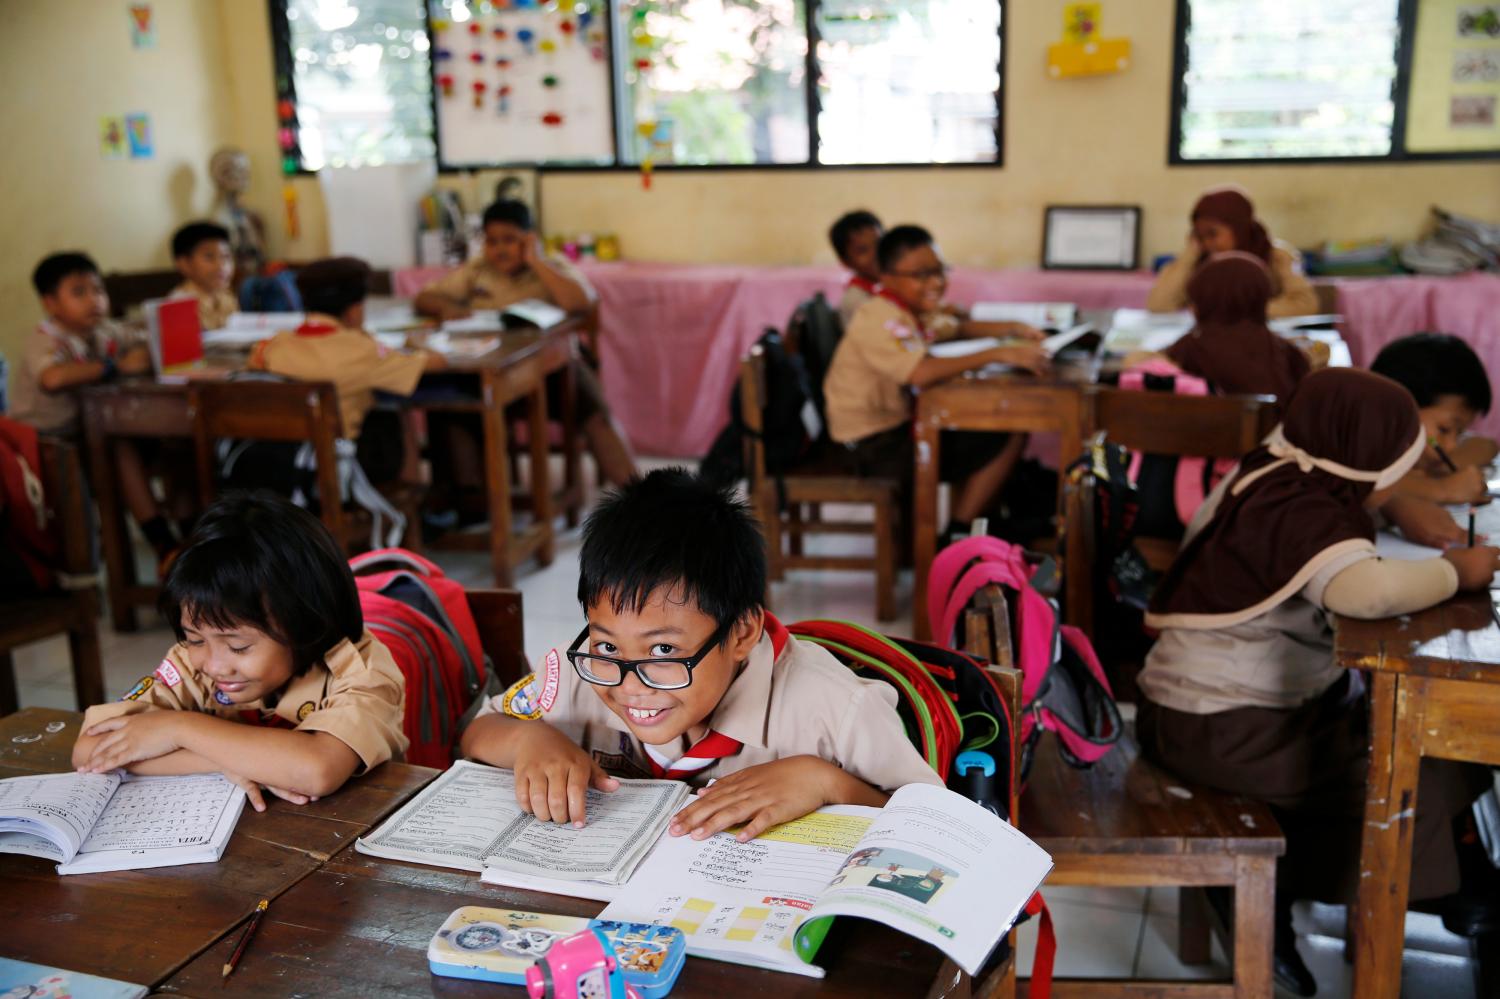 A student reacts to the camera as a teacher teaches the 2013 curriculum inside a classroom at Cempaka Putih district in Jakarta, October 15, 2014. Indonesia plans to discontinue early next year the widely criticised school curriculum that emphasises moral and religious education, a minister said on Monday. Picture taken October 15, 2014. REUTERS/Beawiharta (INDONESIA - Tags: EDUCATION POLITICS) - GM1EAC81NZV01